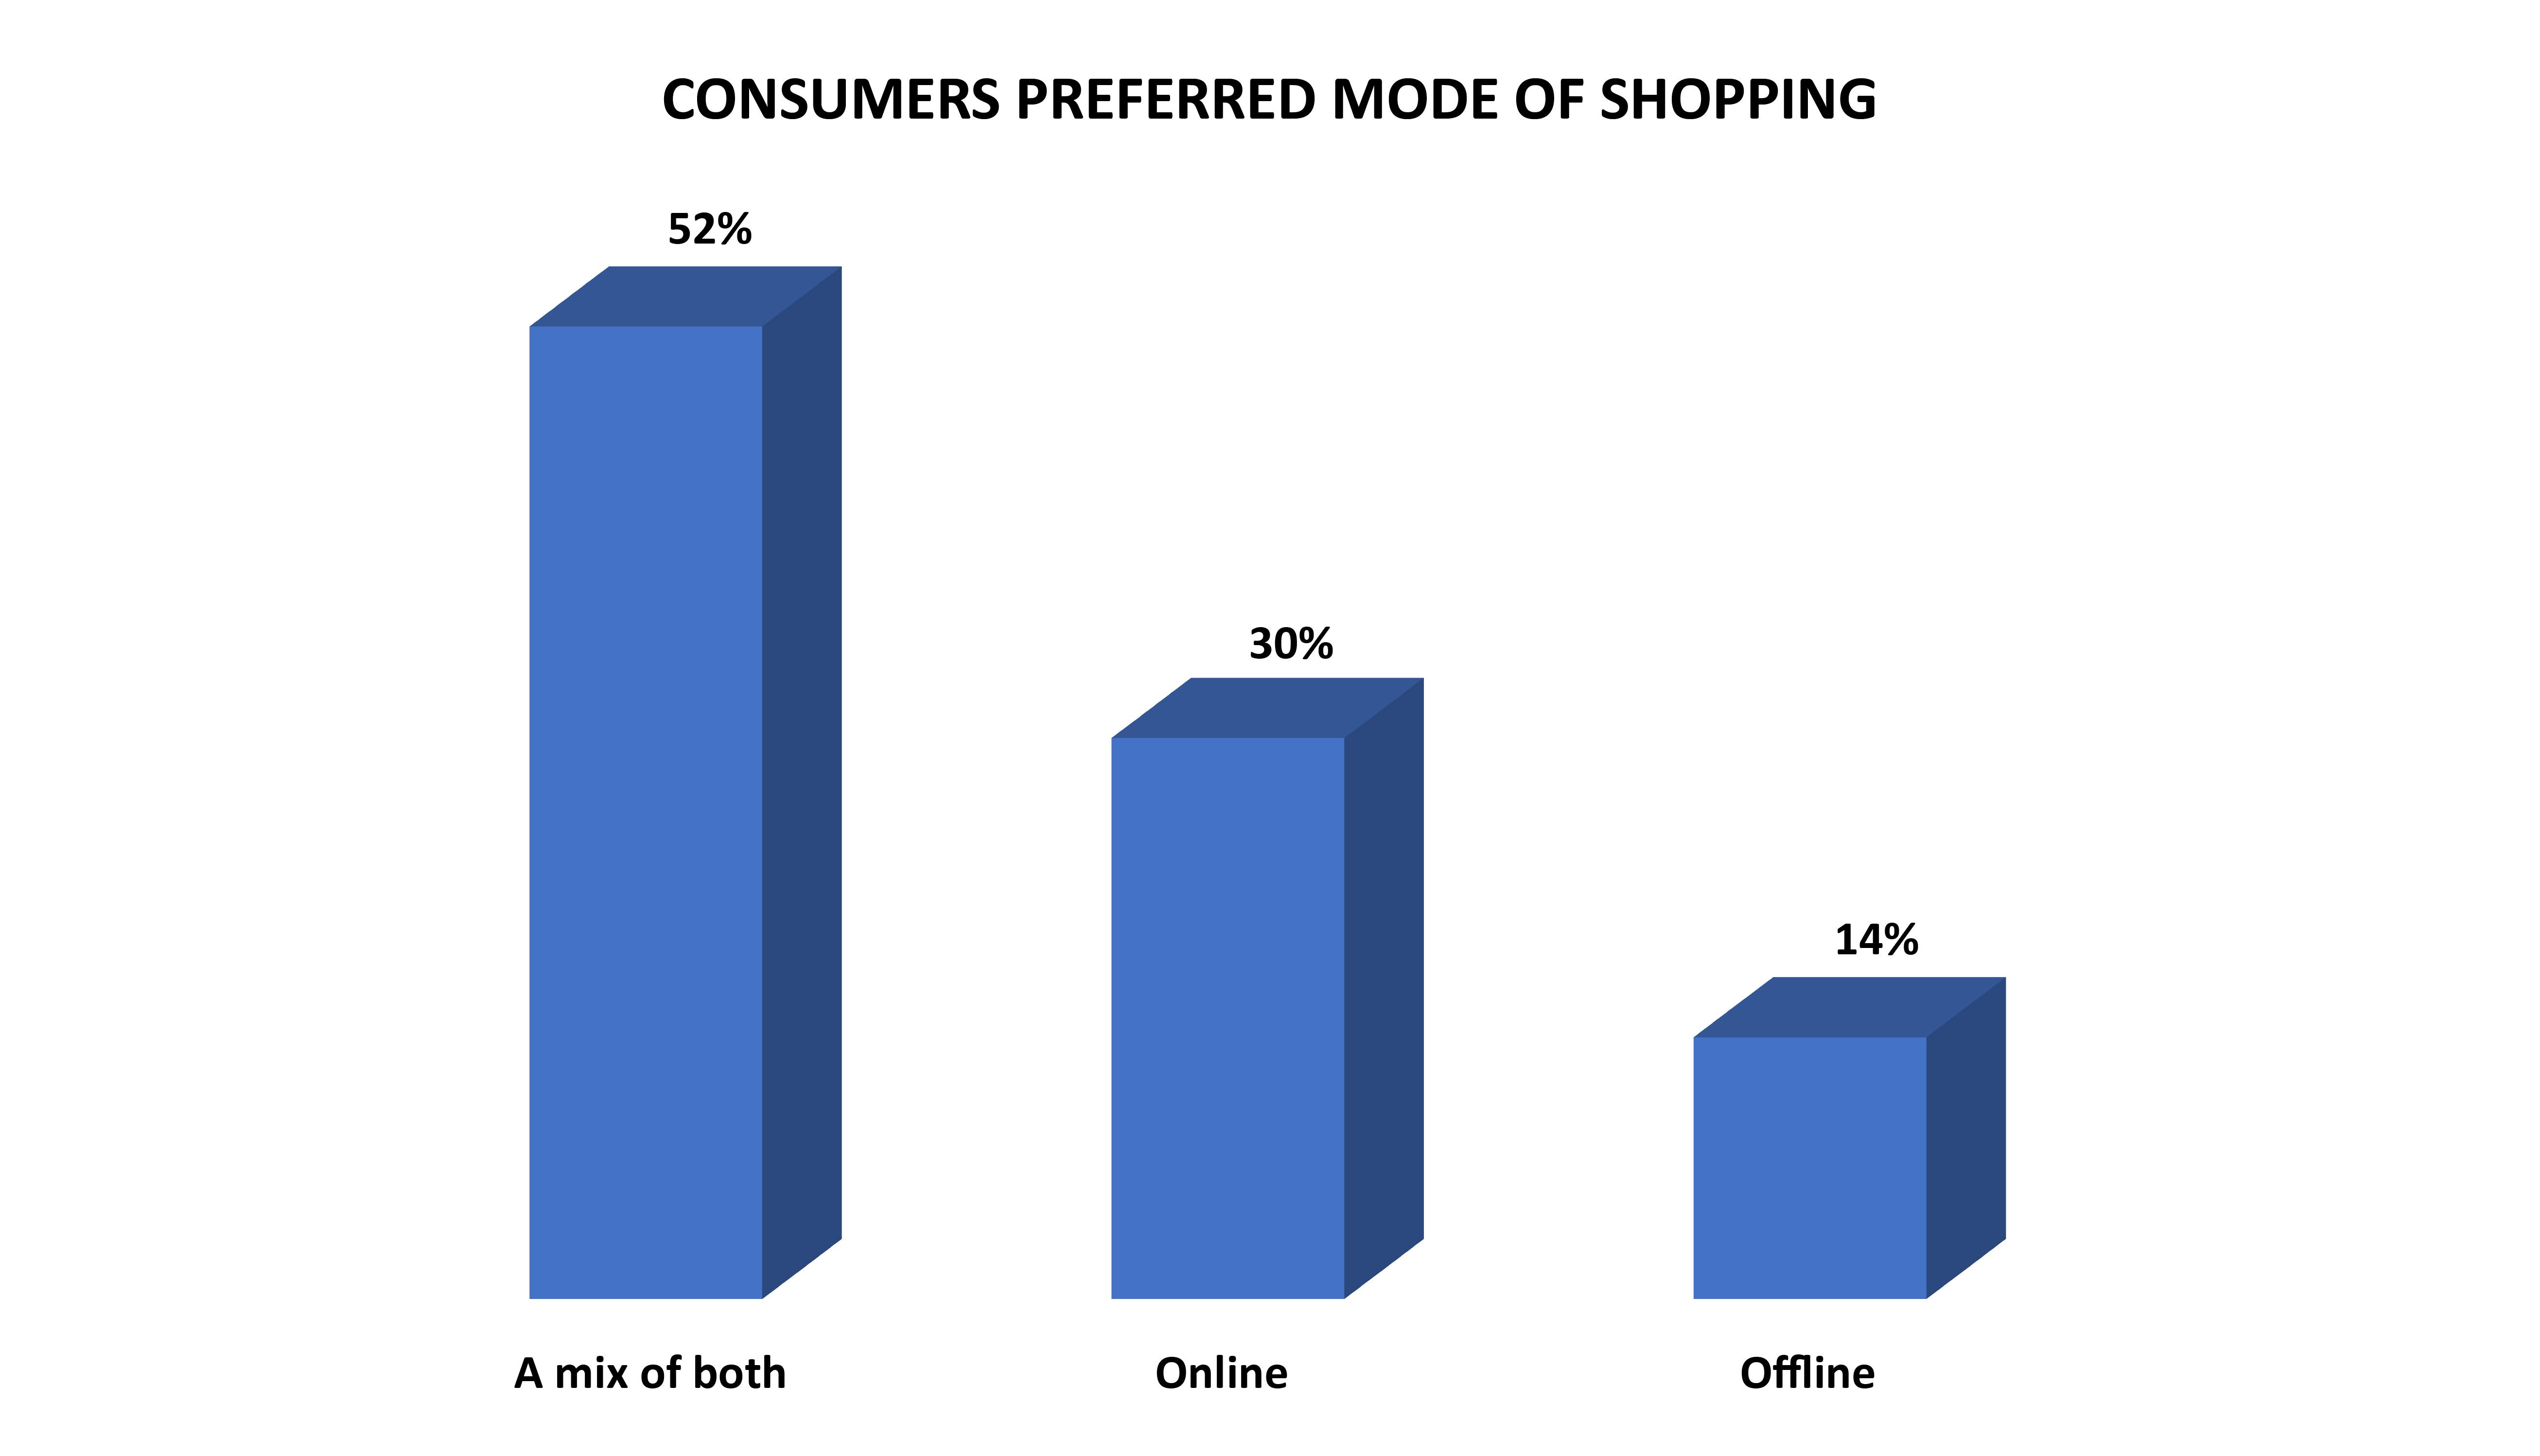 Consumers preferred hybrid mode of shopping